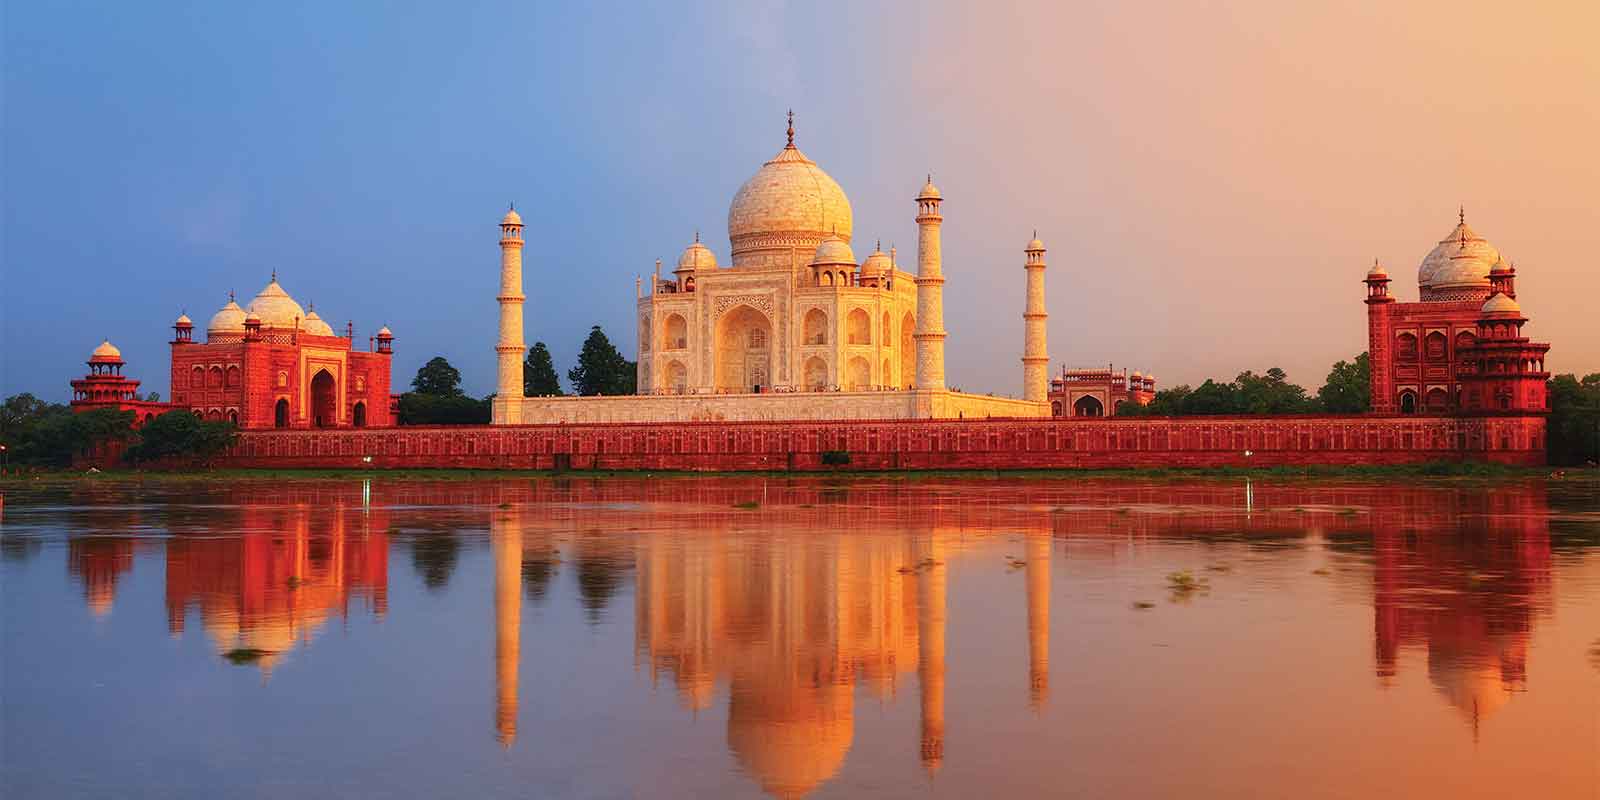 View of Taj Mahal with reflection and red hue